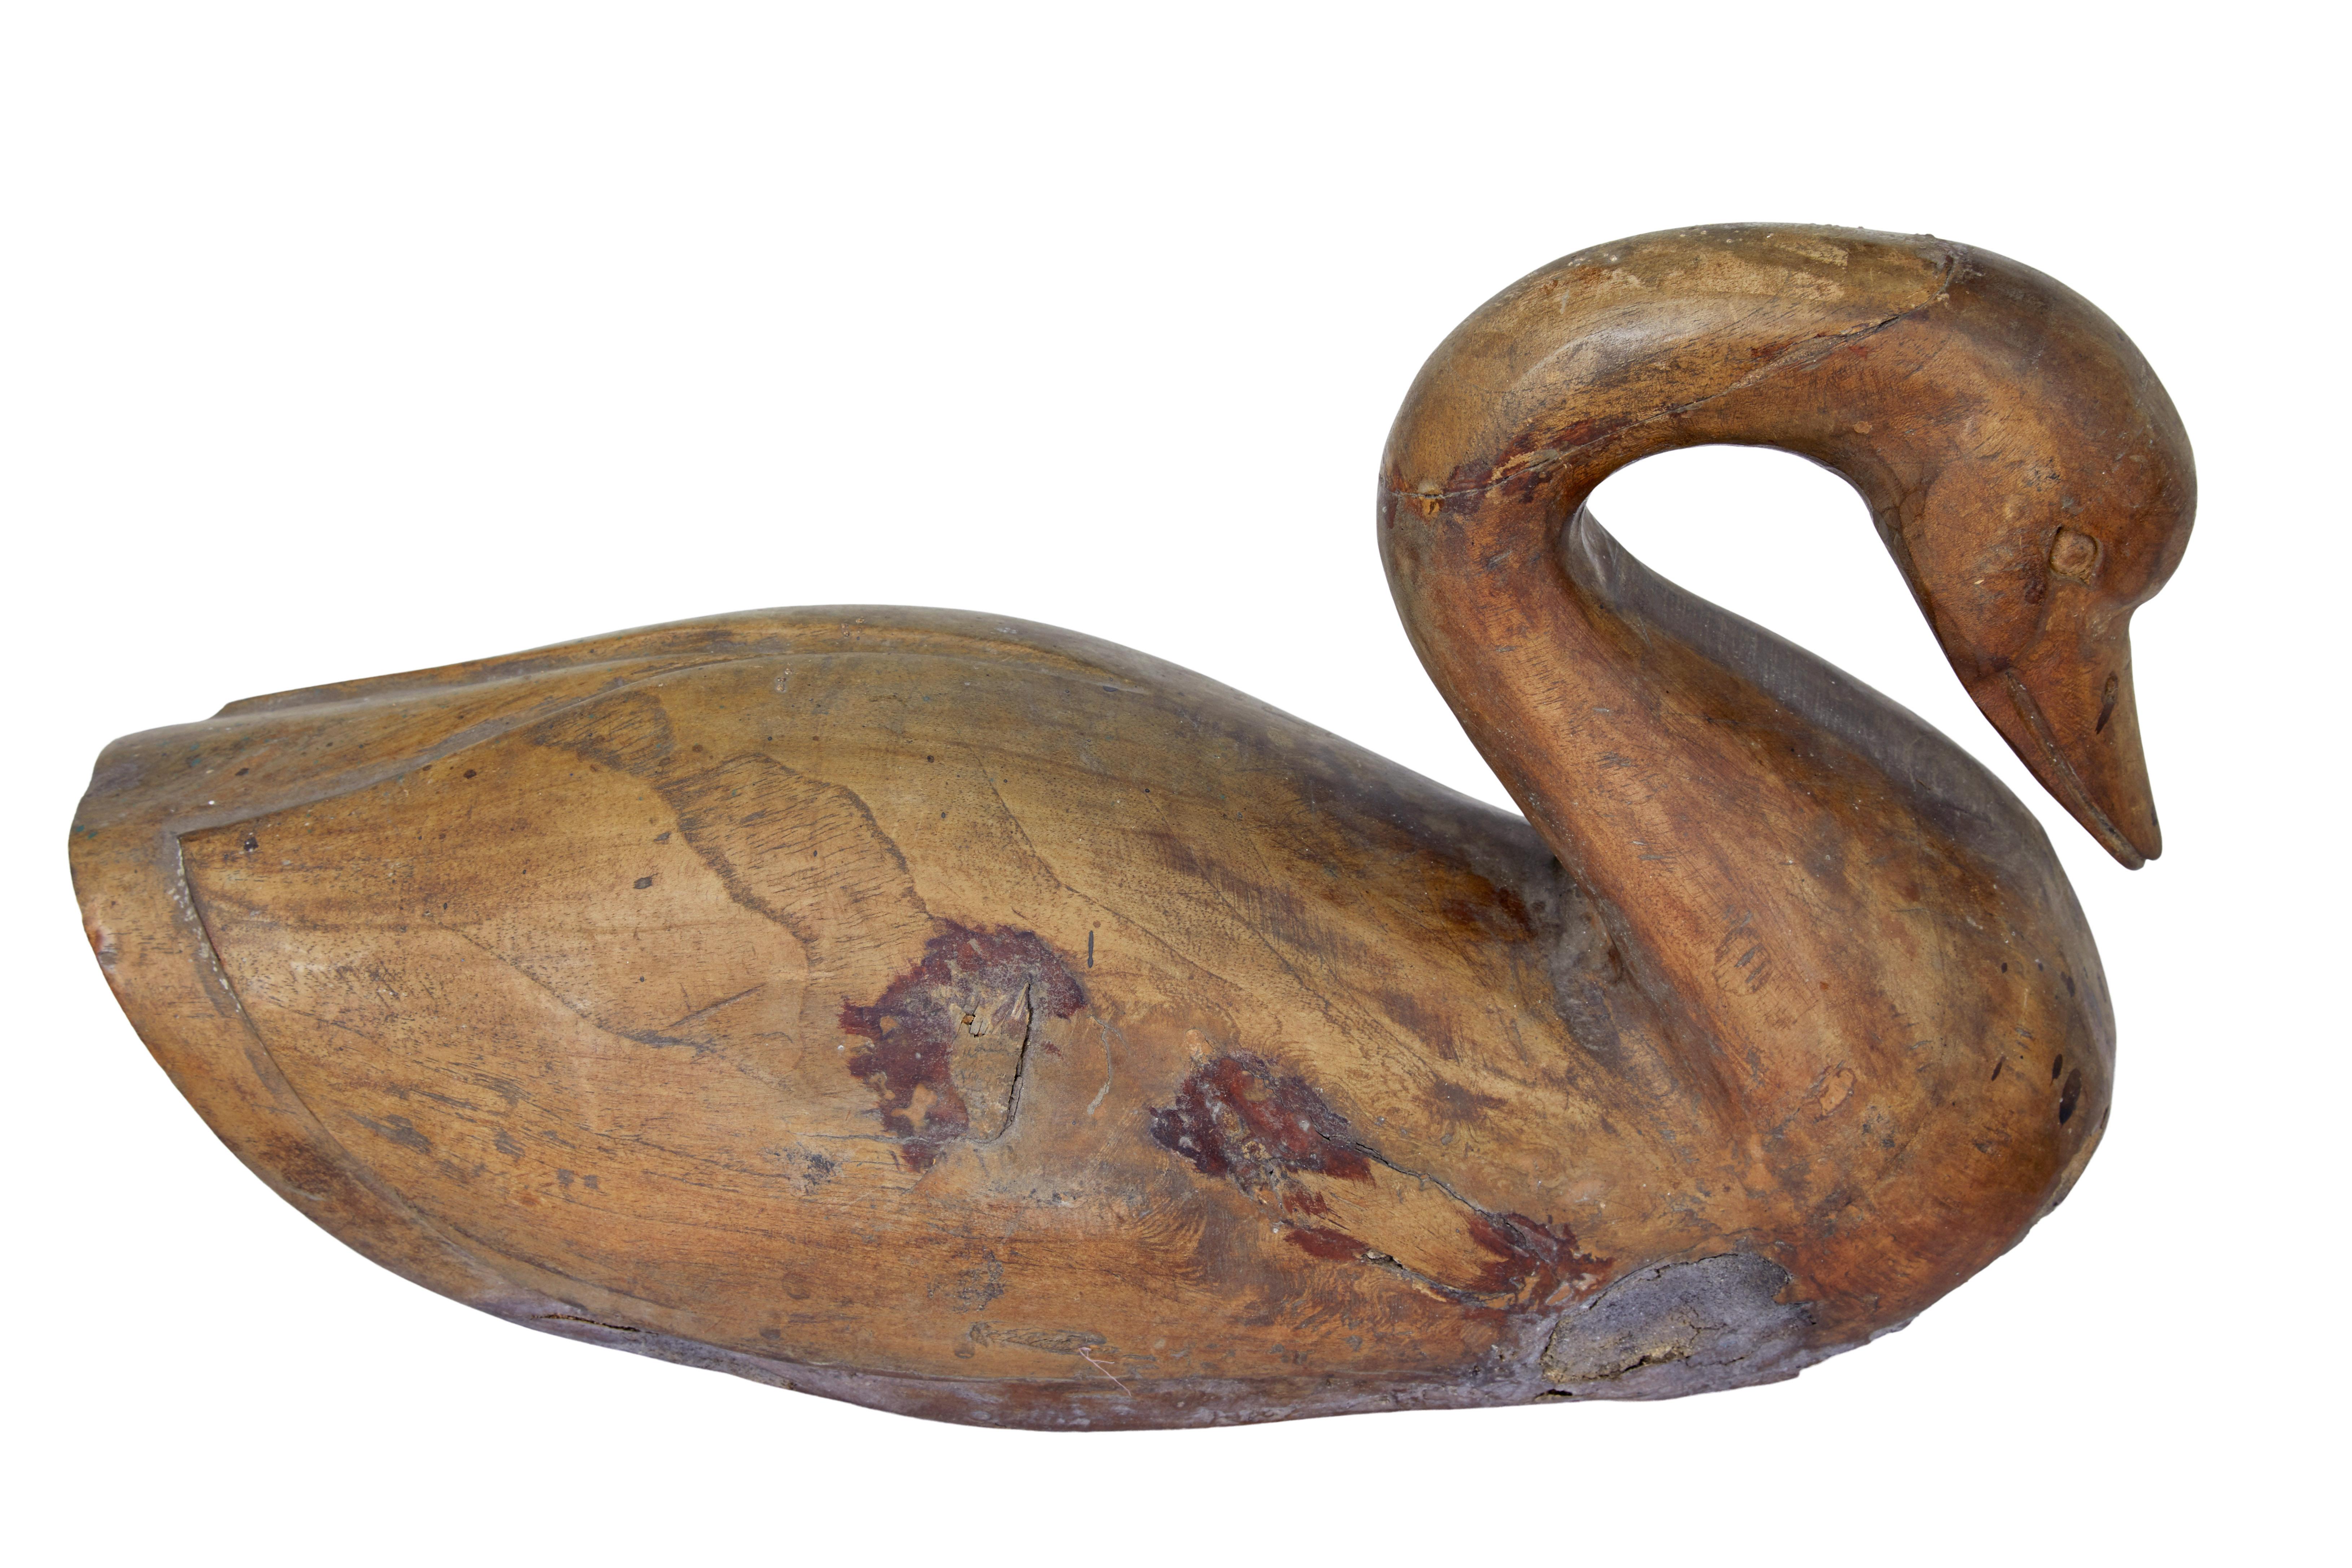 19th century primitive carved swan, circa 1870.

A rustic find on our recent travels to Sweden. Carved from a single piece of wood. Presented in its original found condition.

Areas of restoration, fill and staining.